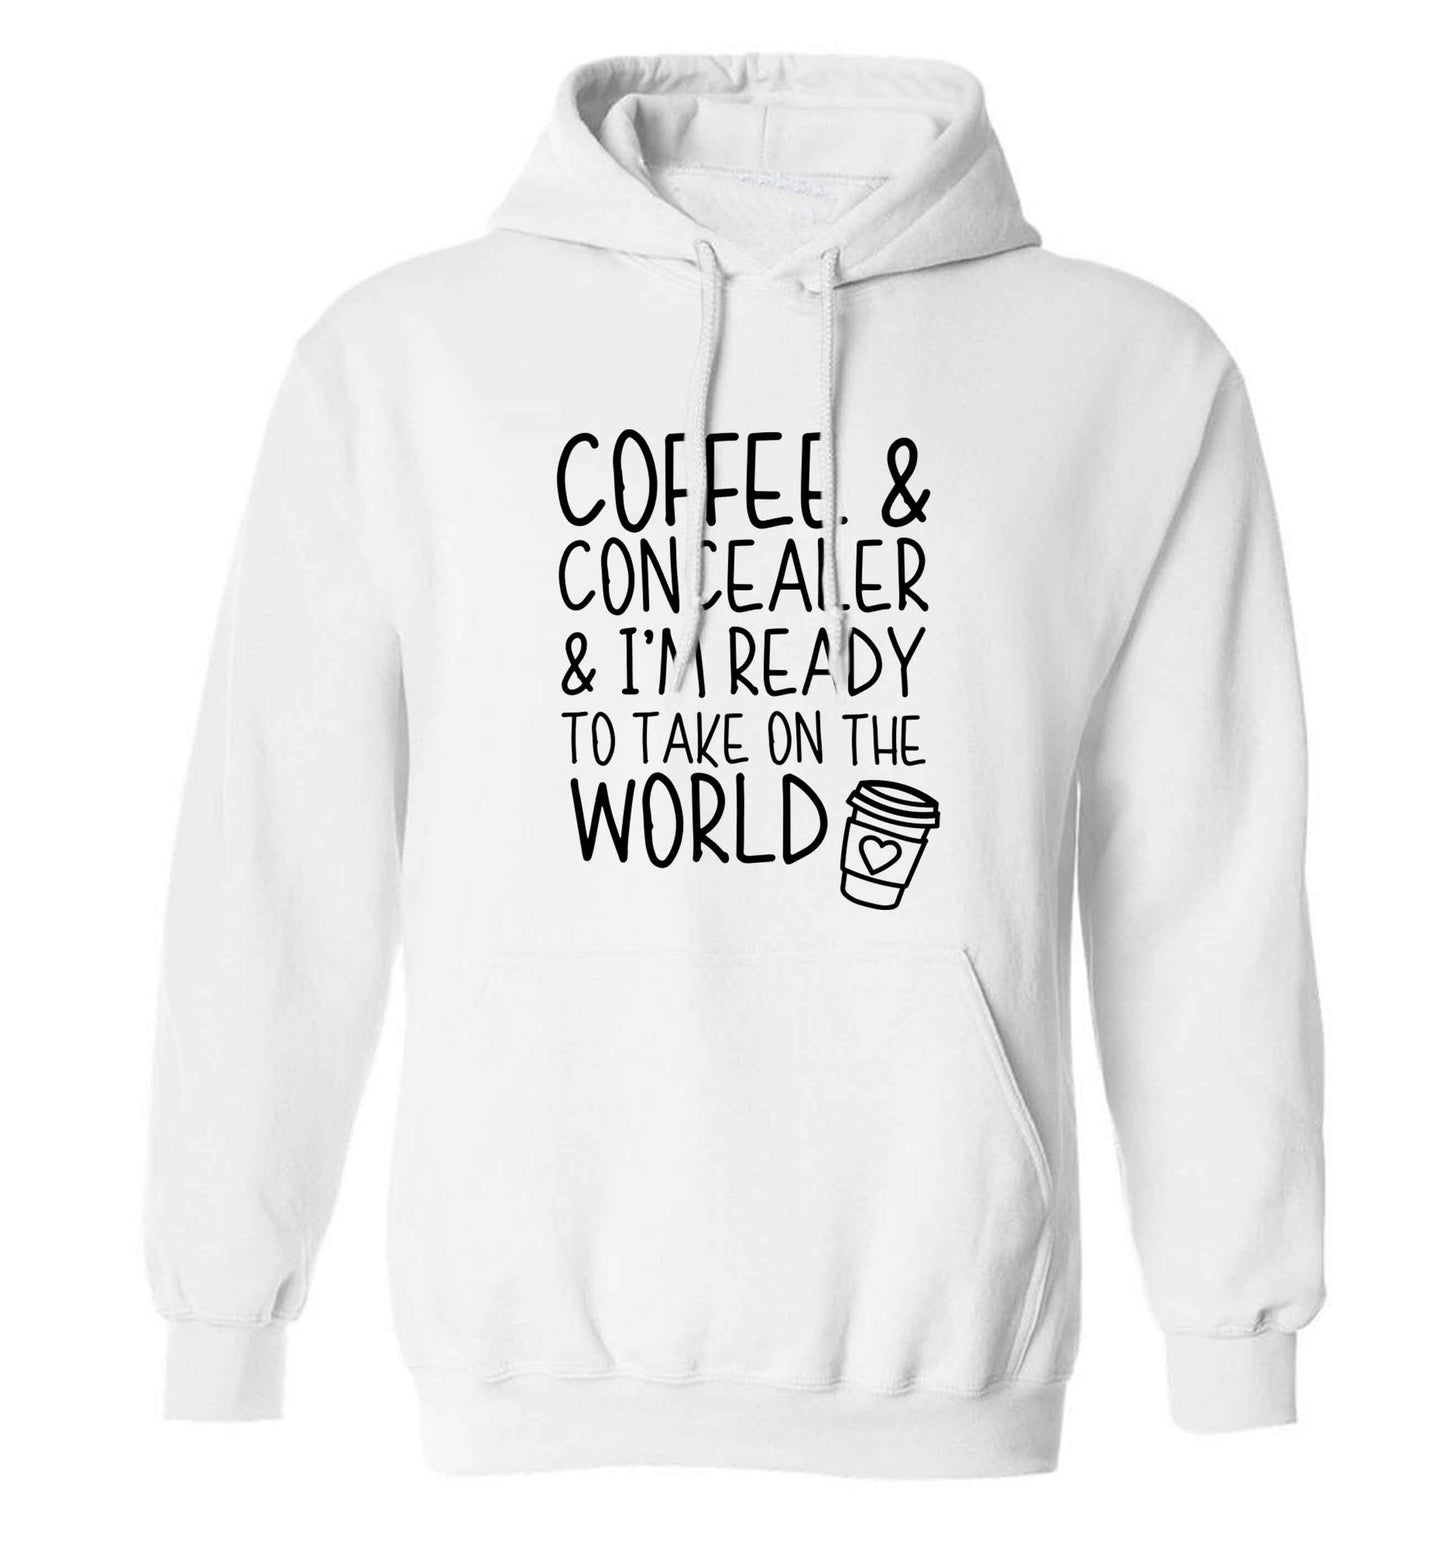 Coffee and concealer and I'm ready to take on the world adults unisex white hoodie 2XL